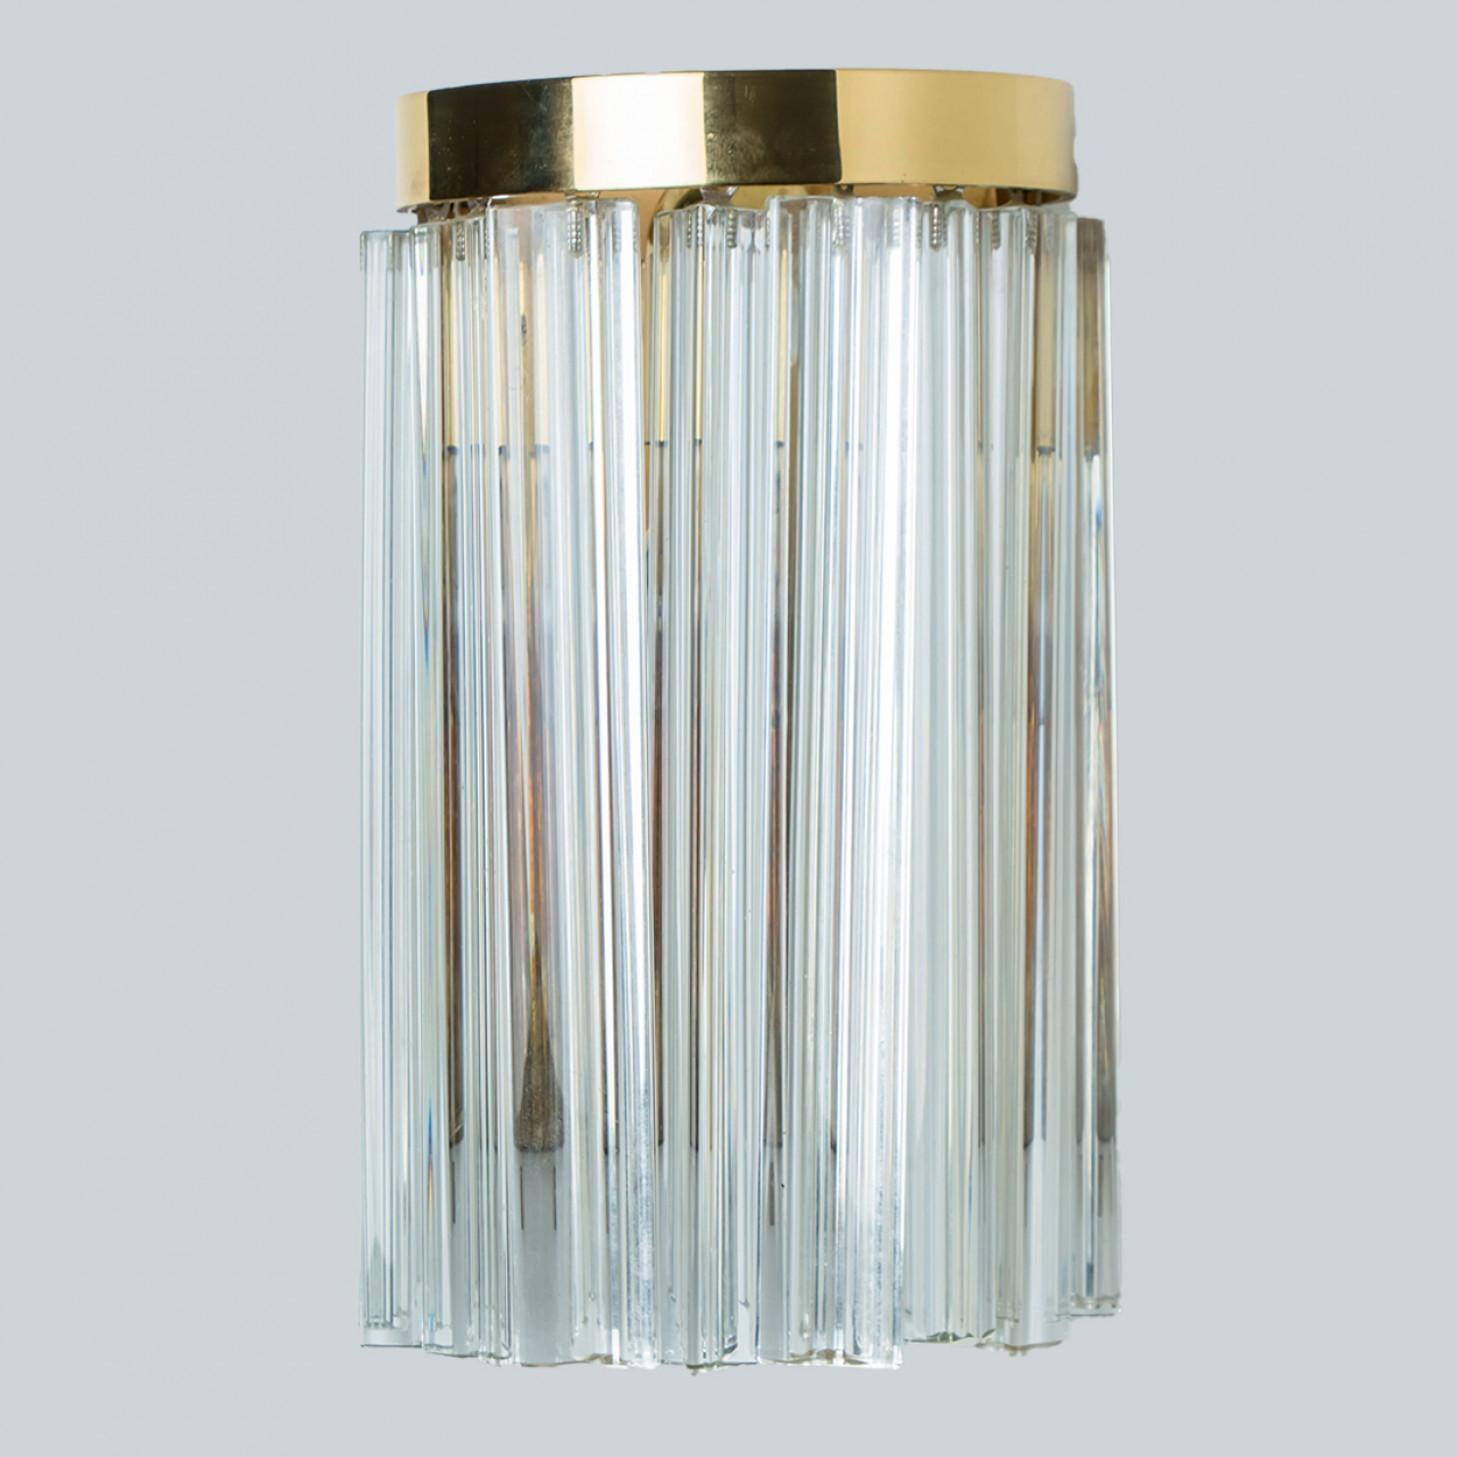 A Pair of Venini Clear Brass Glass Wall Lights, 1970 For Sale 3